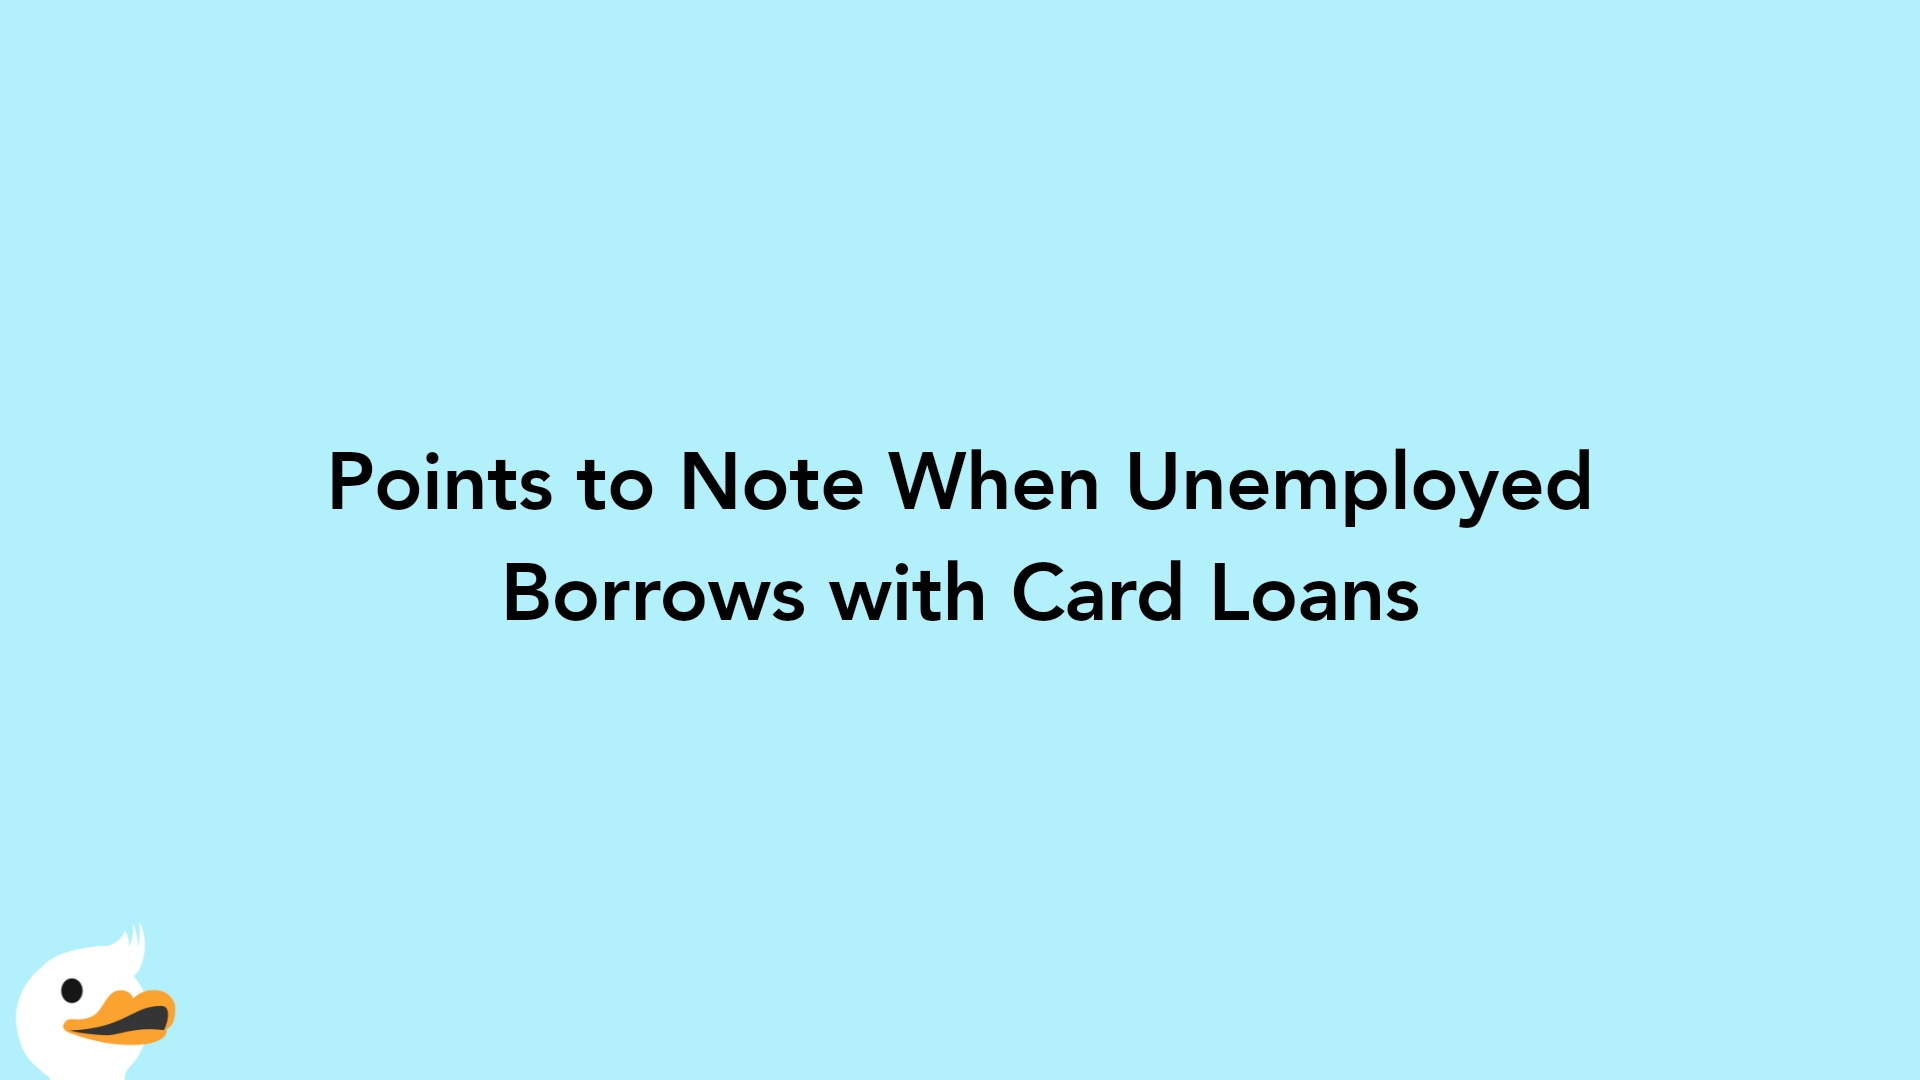 Points to Note When Unemployed Borrows with Card Loans